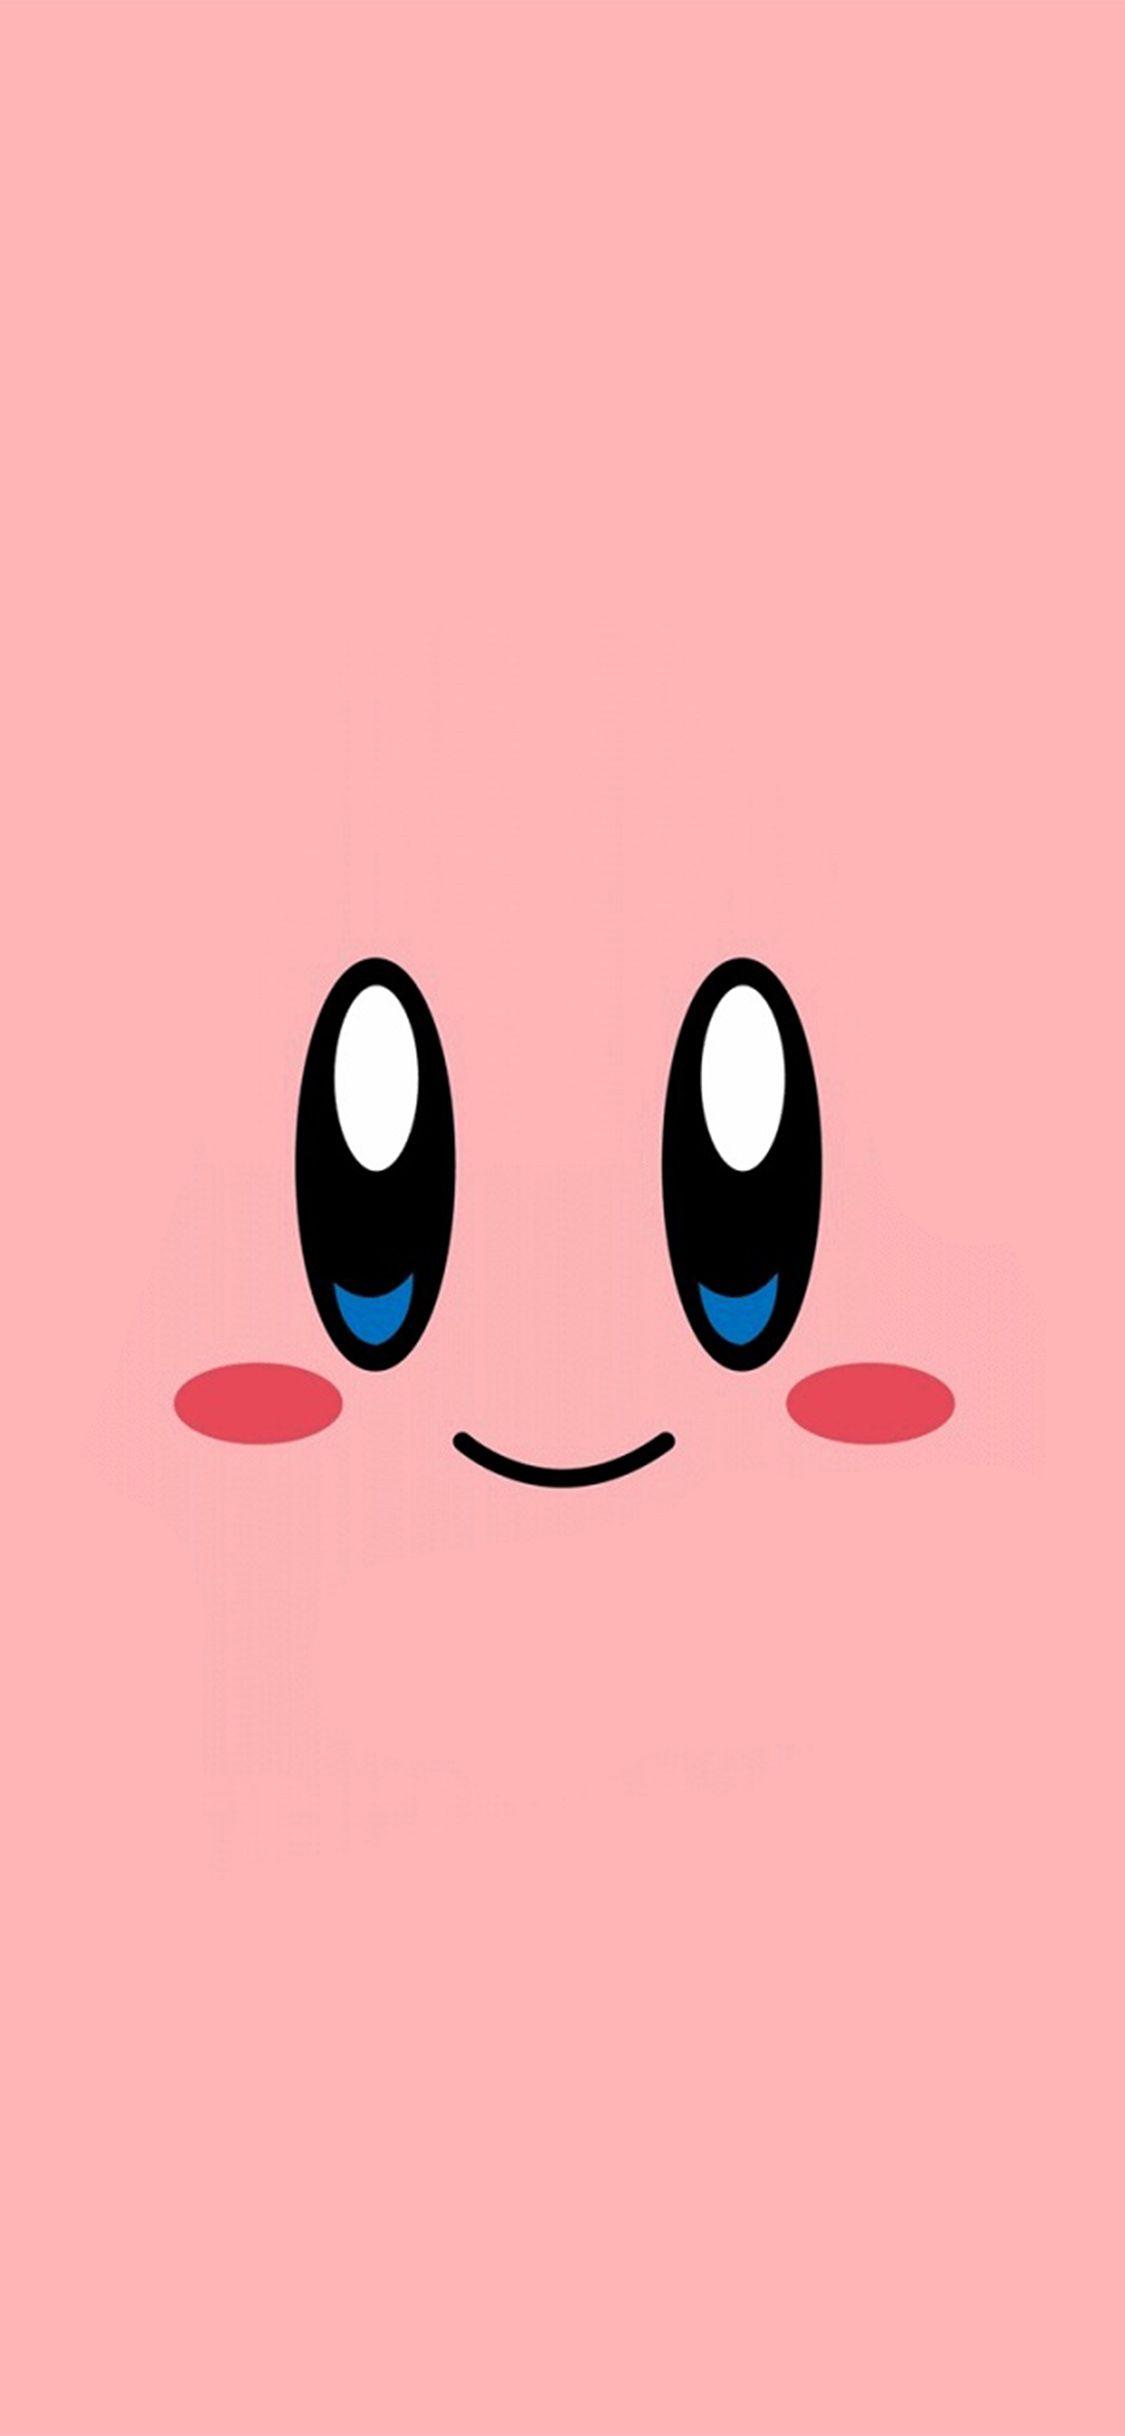 iPhone X wallpaper. kirby pink face cute